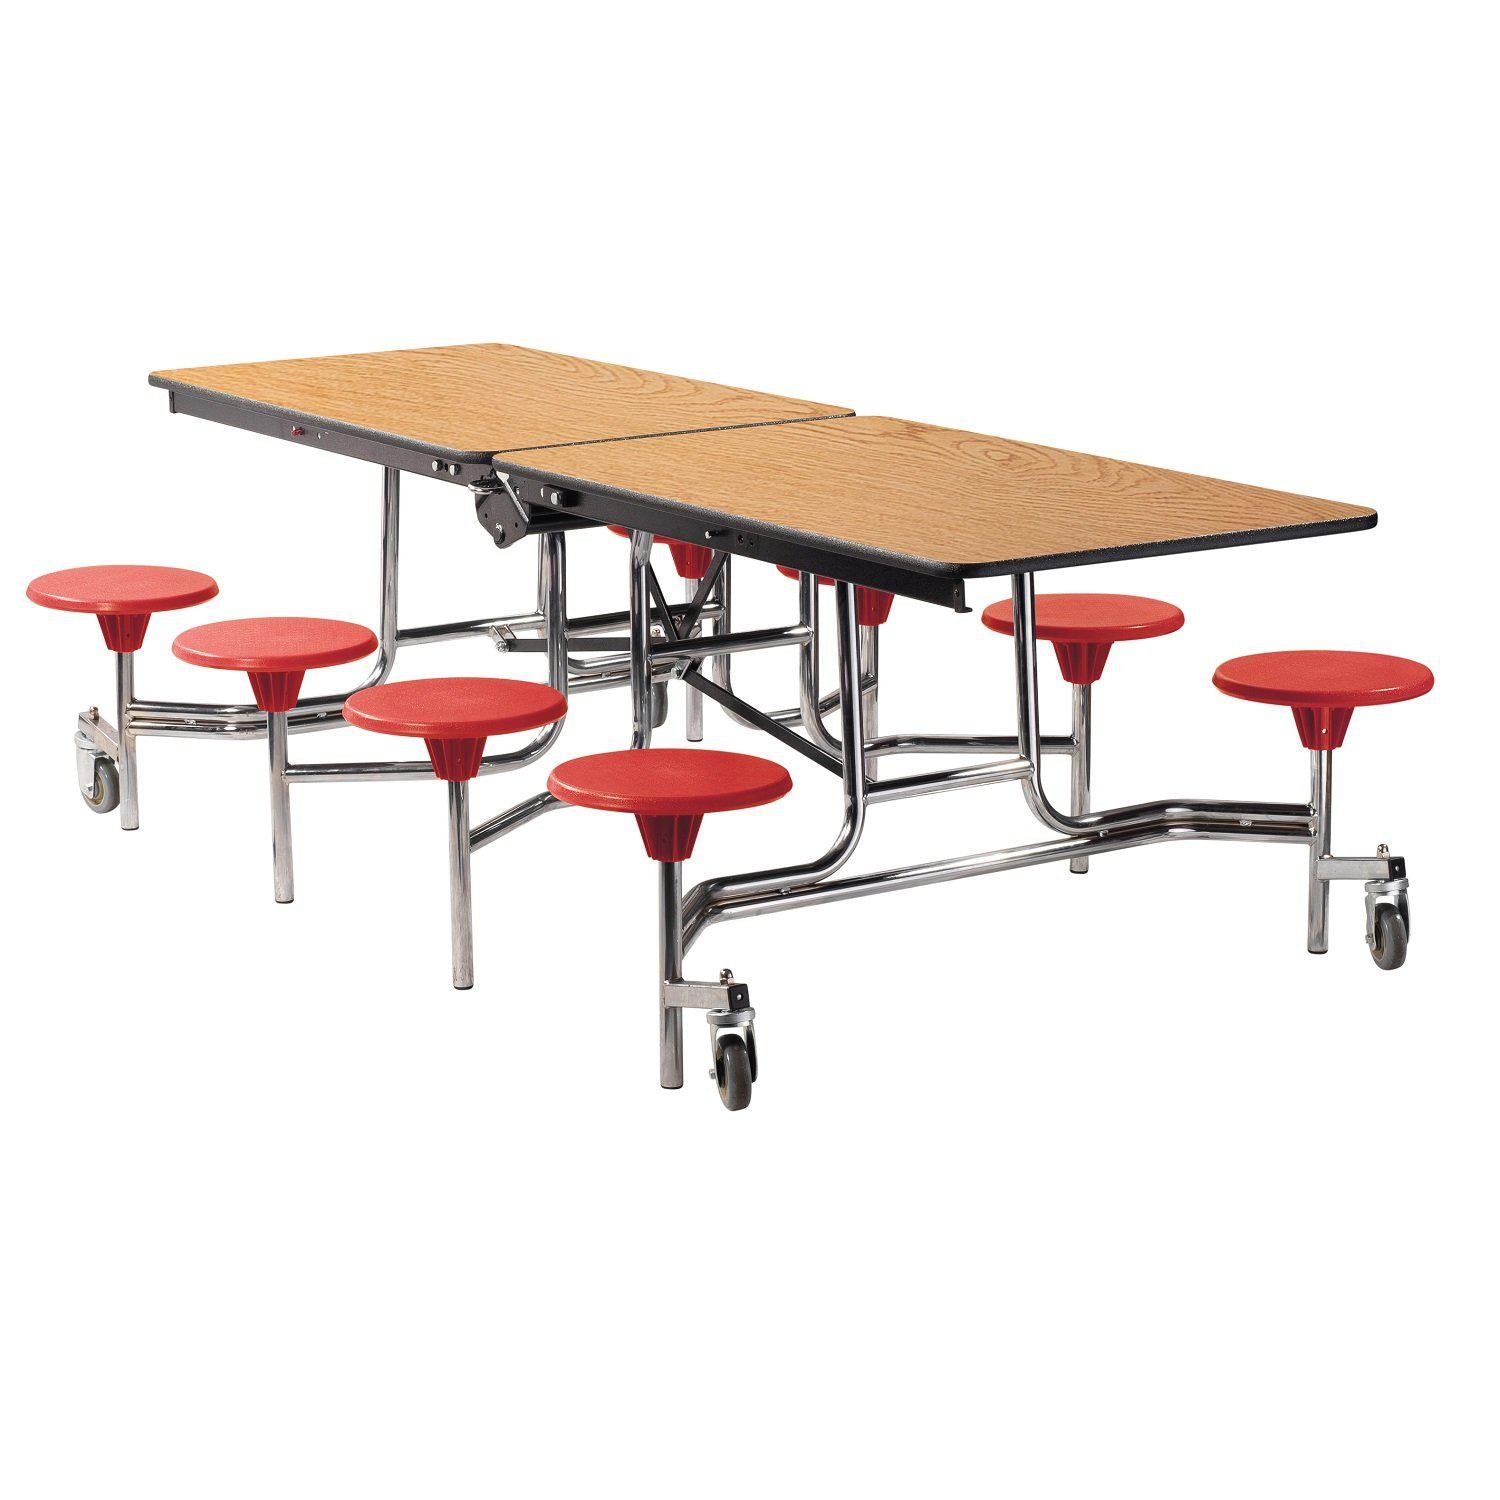 Mobile Cafeteria Table with 8 Stools, 8'L Rectangular, Particleboard Core, Vinyl T-Mold Edge, Chrome Frame